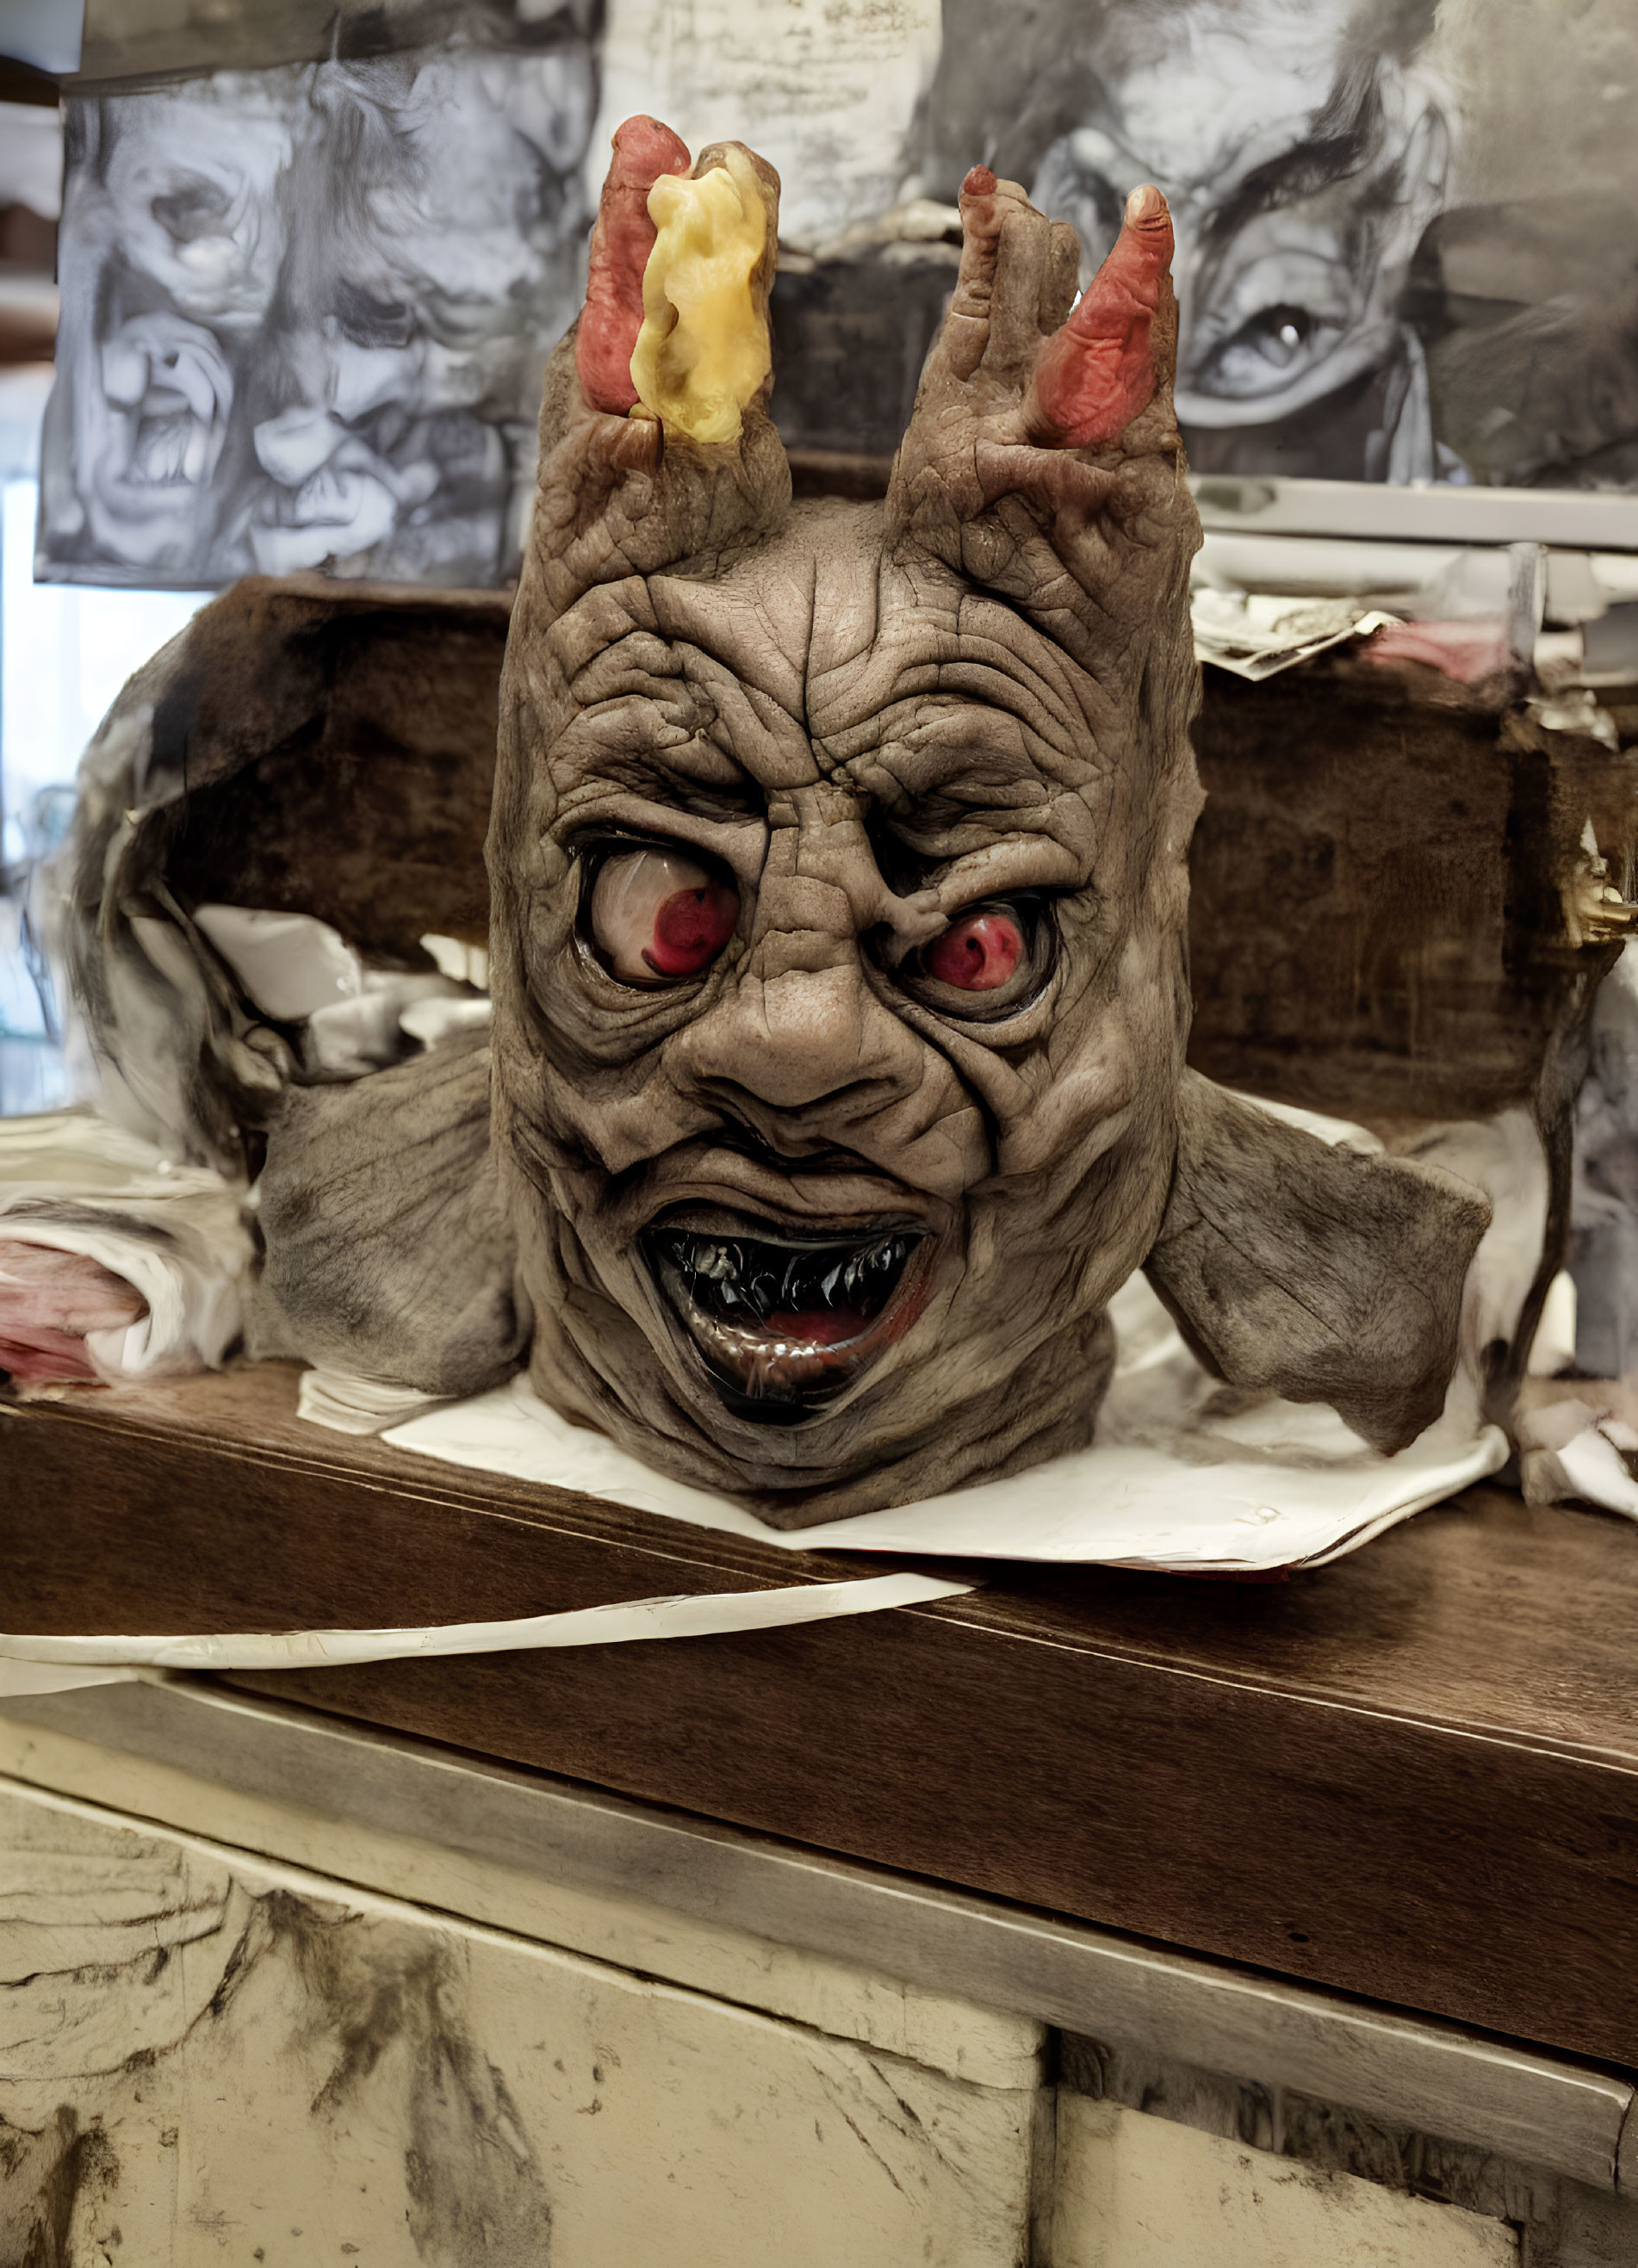 Detailed Demonic Creature Mask with Red Eyes, Teeth, and Horns on Artist's Table